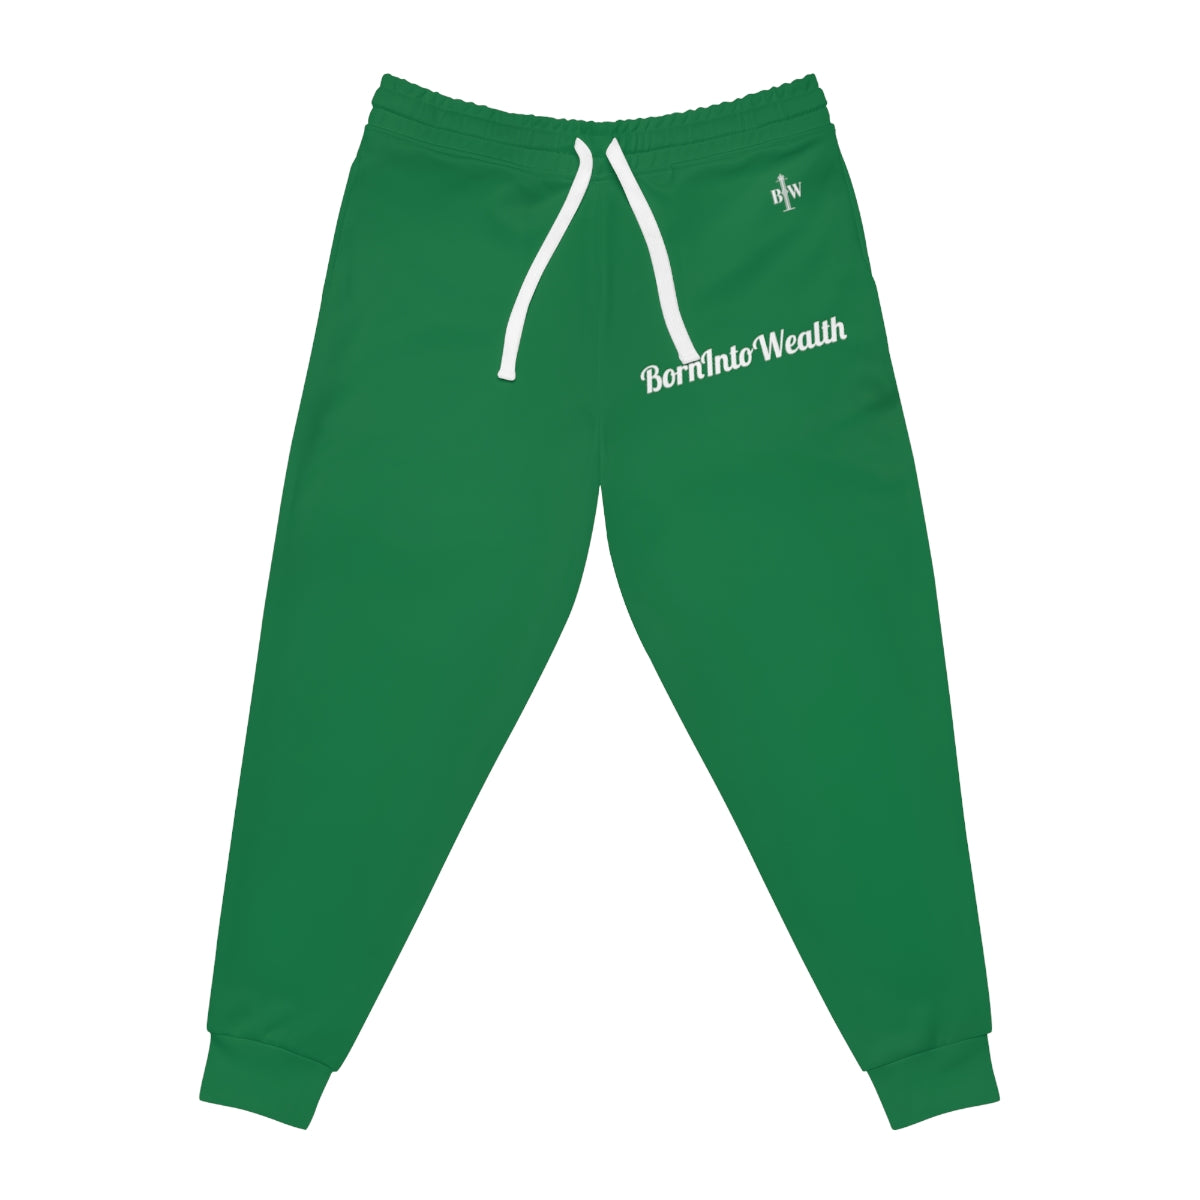 BIW Green/WHT Athletic Joggers